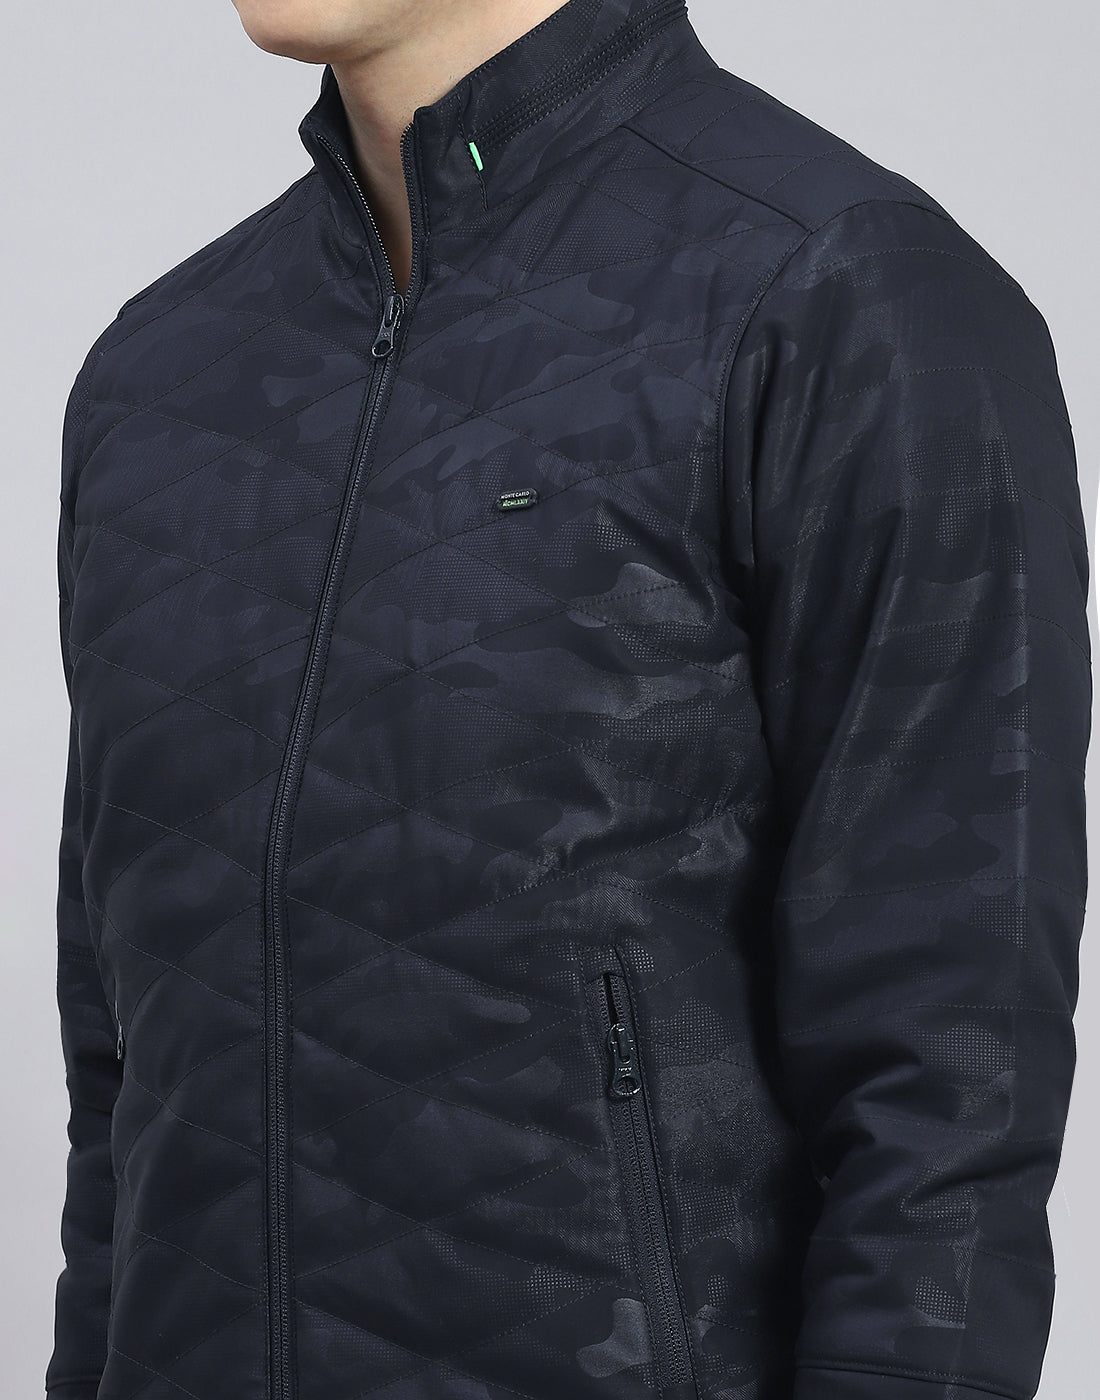 Men Navy Blue Solid Stand Collar Full Sleeve Jacket